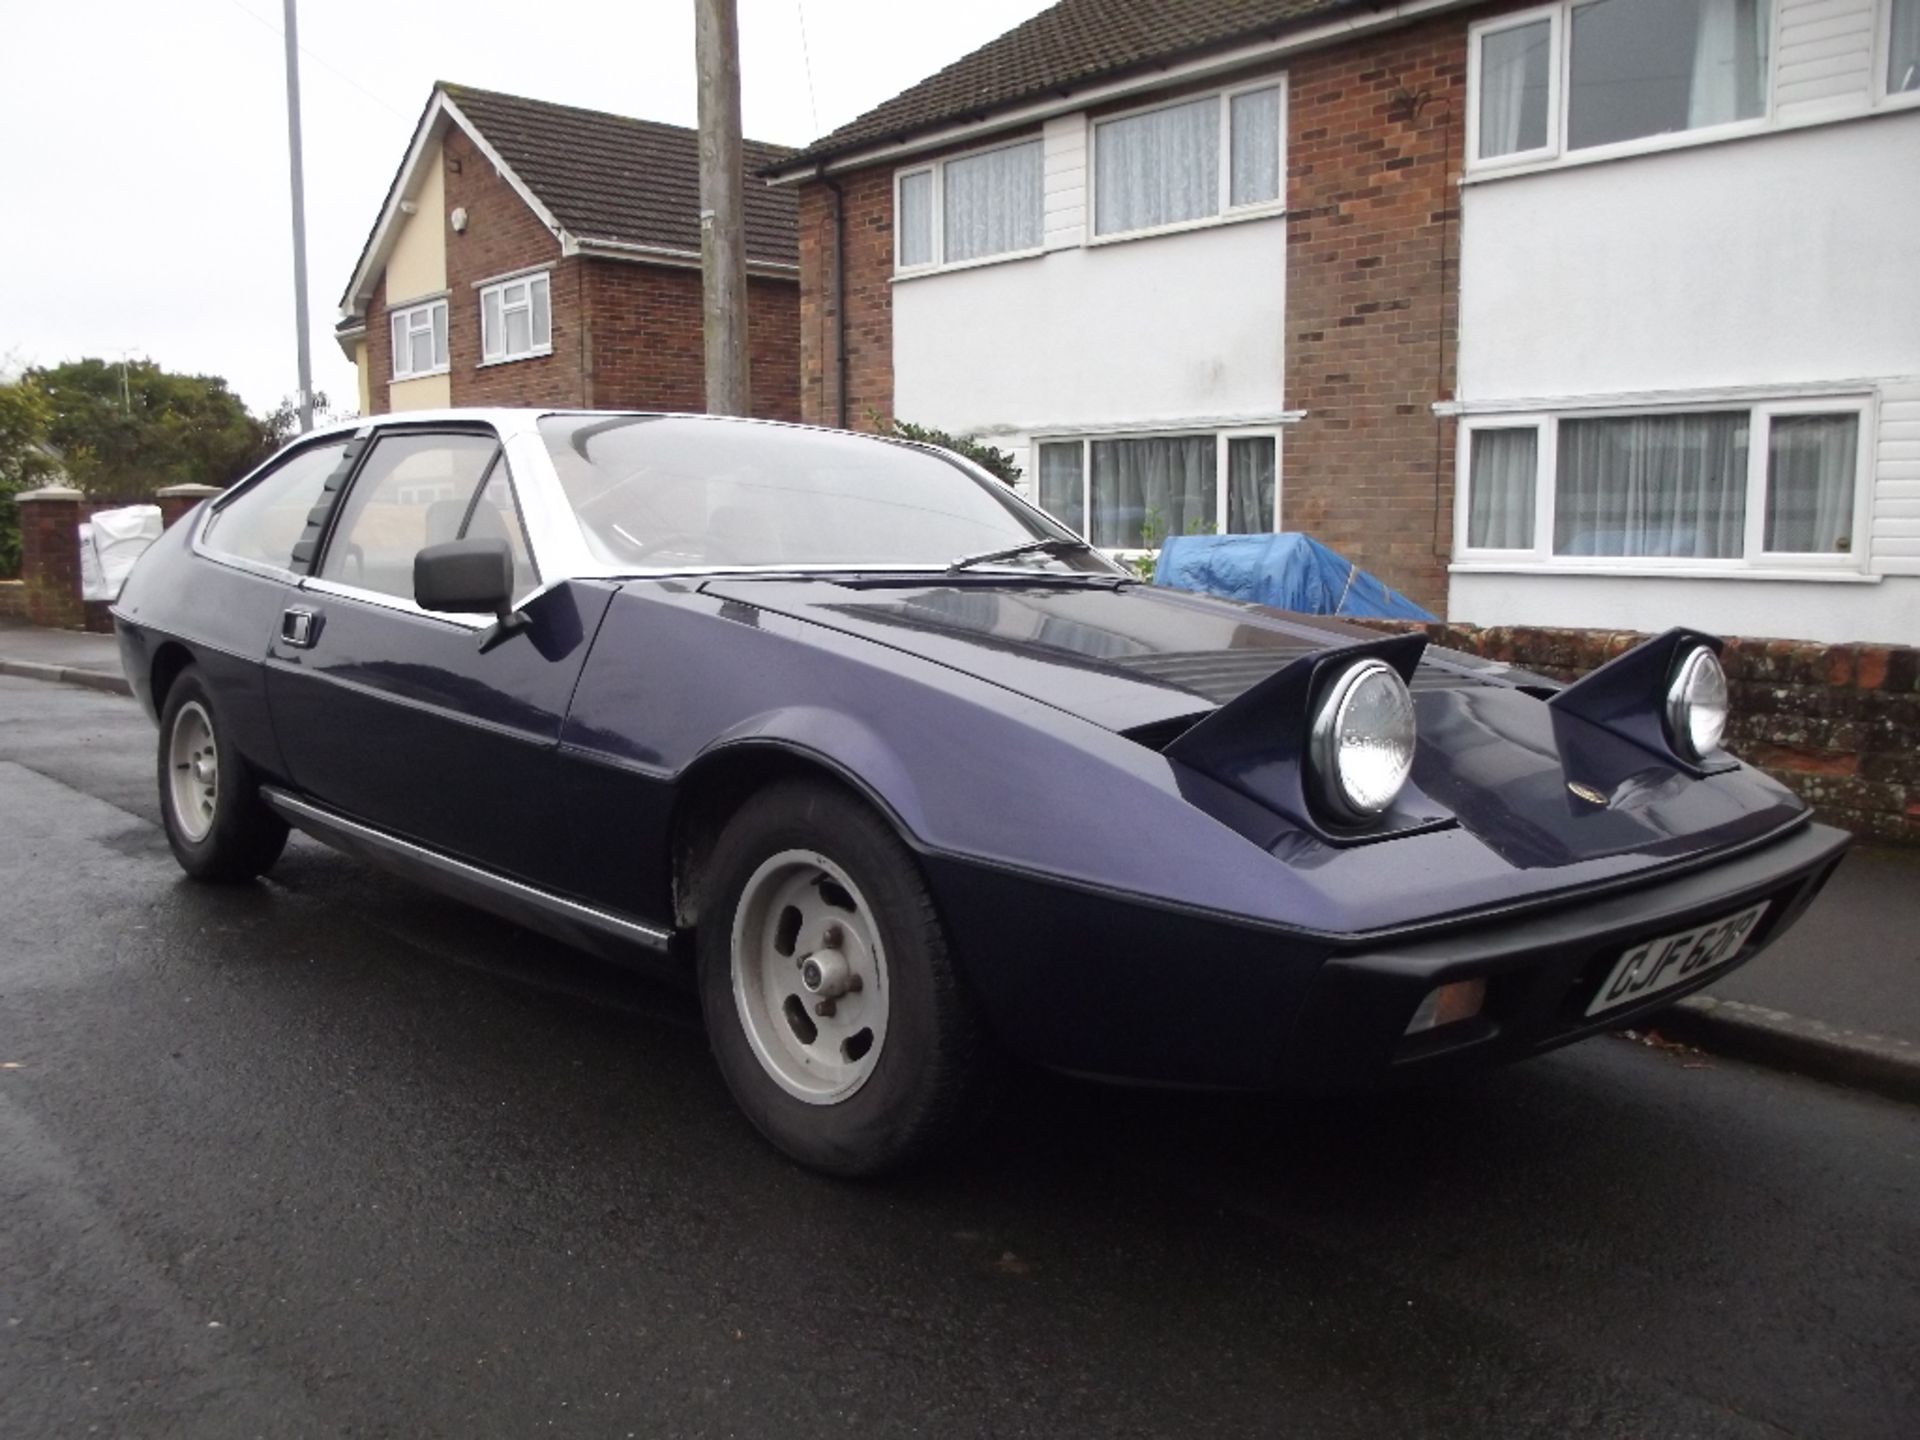 A 1976 Lotus Eclat 502, registration number OJF 621P, chassis number 7512101190,